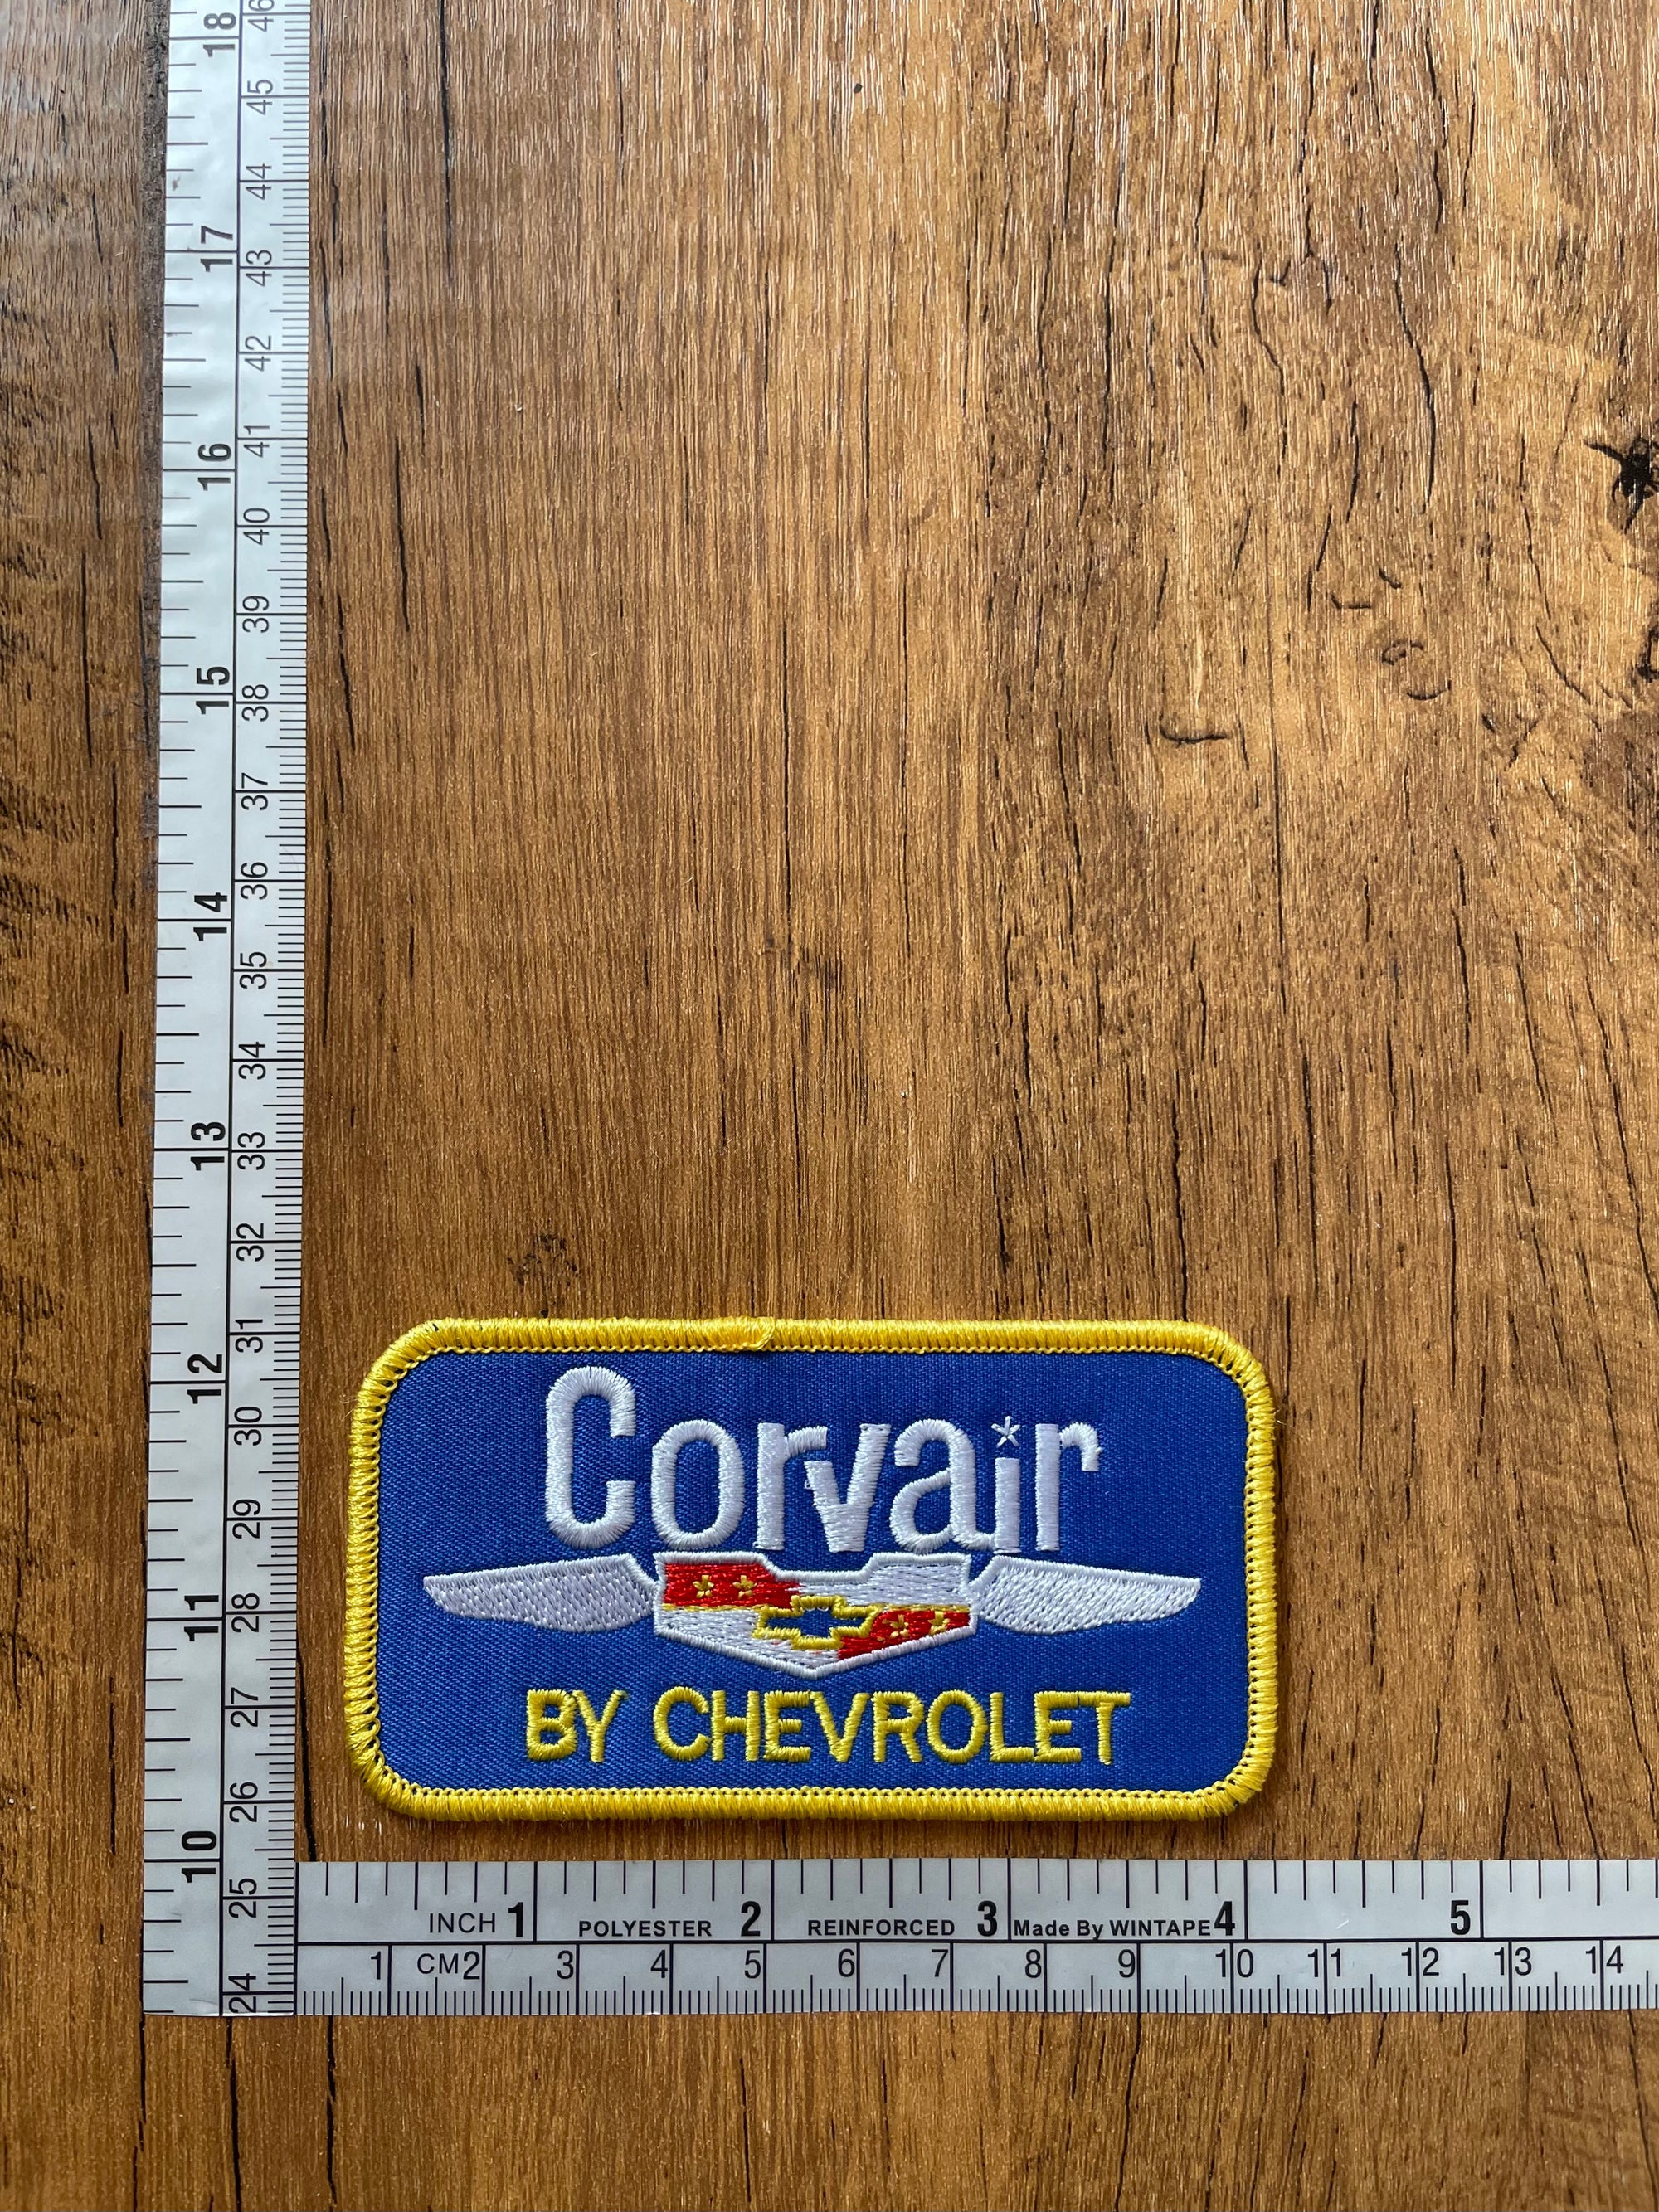 Corvair By Chevrolet